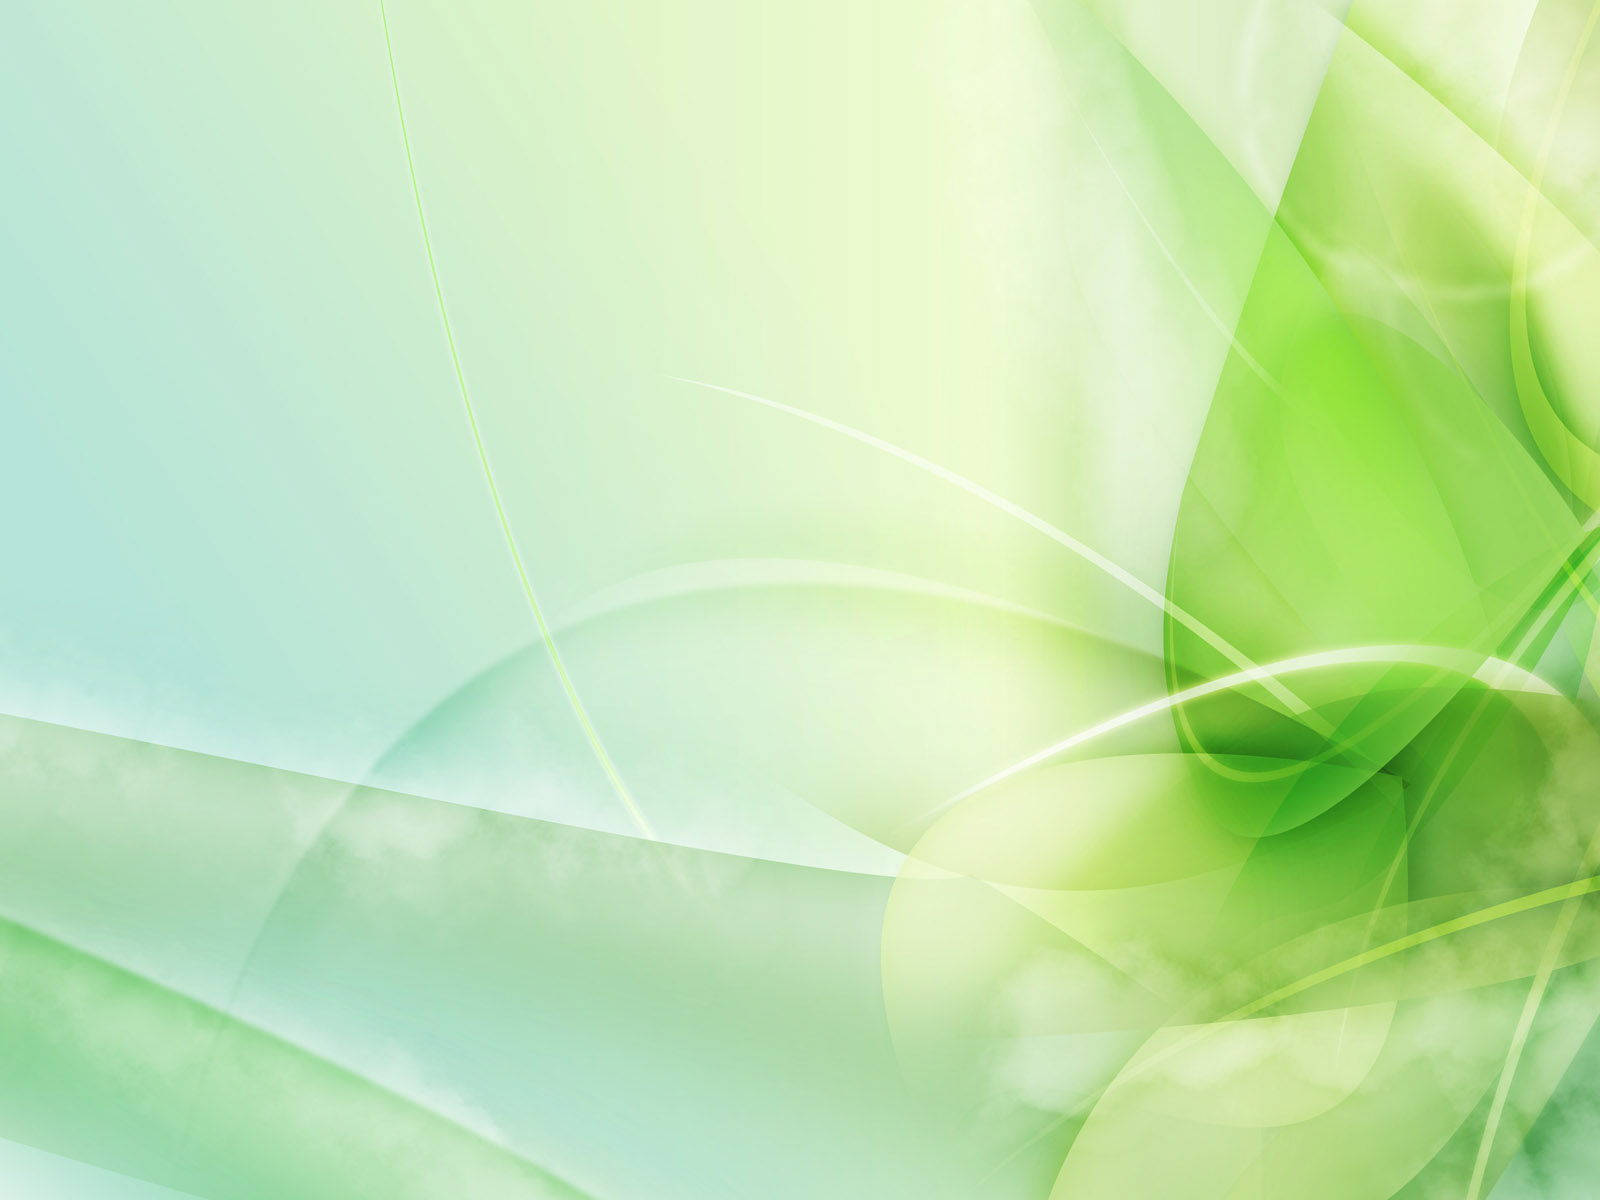 Hgh Hormone Releasers Light Green Abstract Background Wallpaper